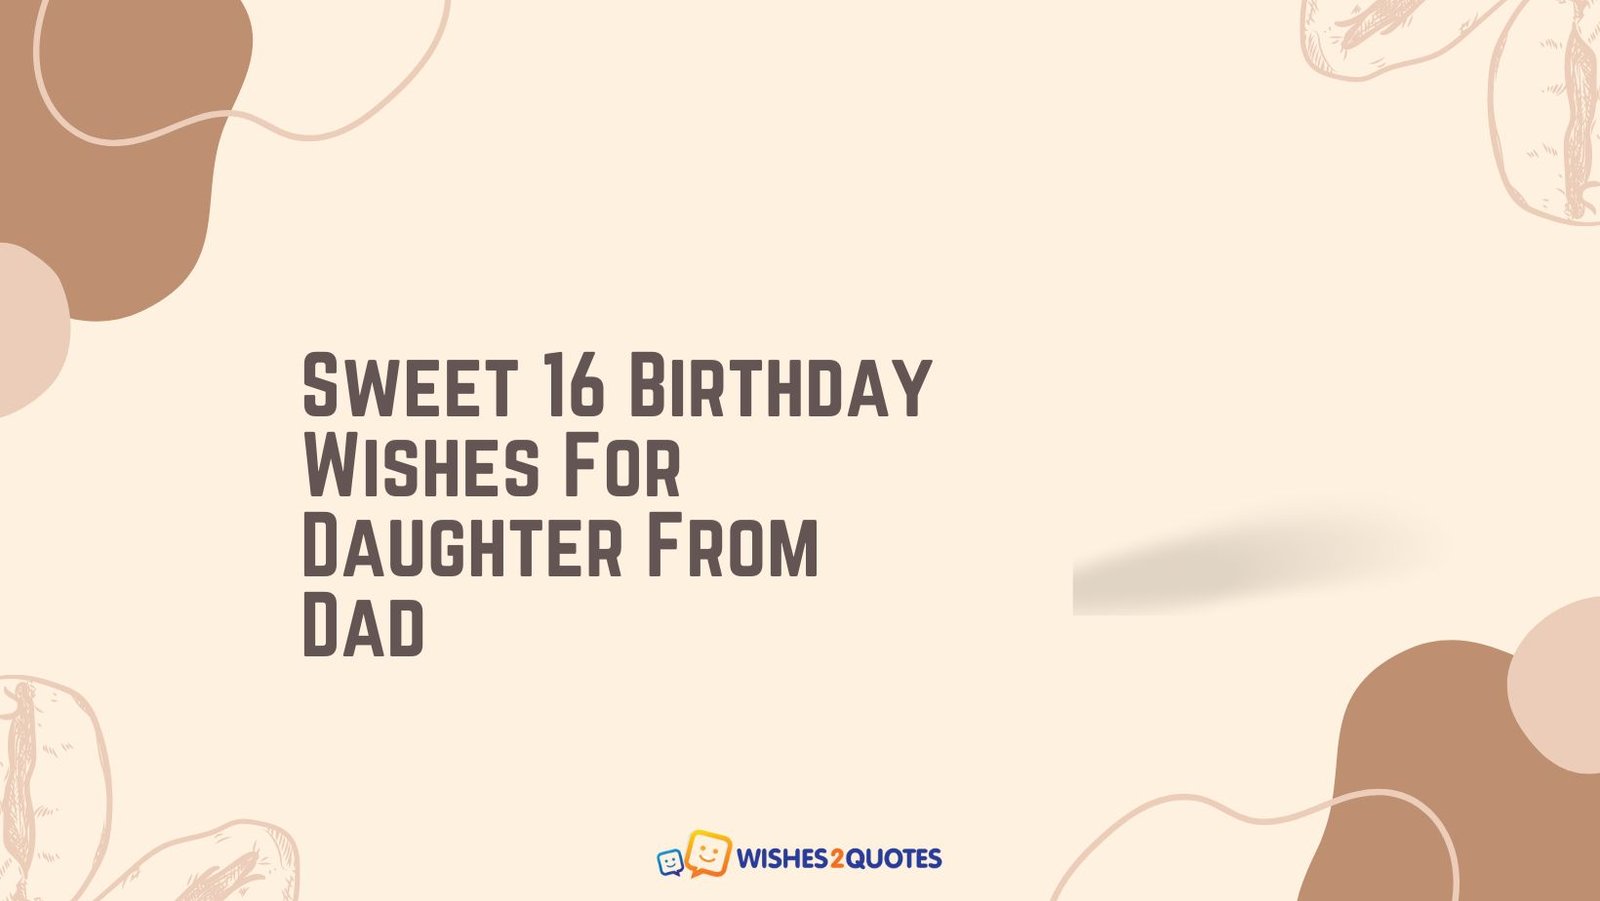 Sweet 16 Birthday Wishes For Daughter From Dad